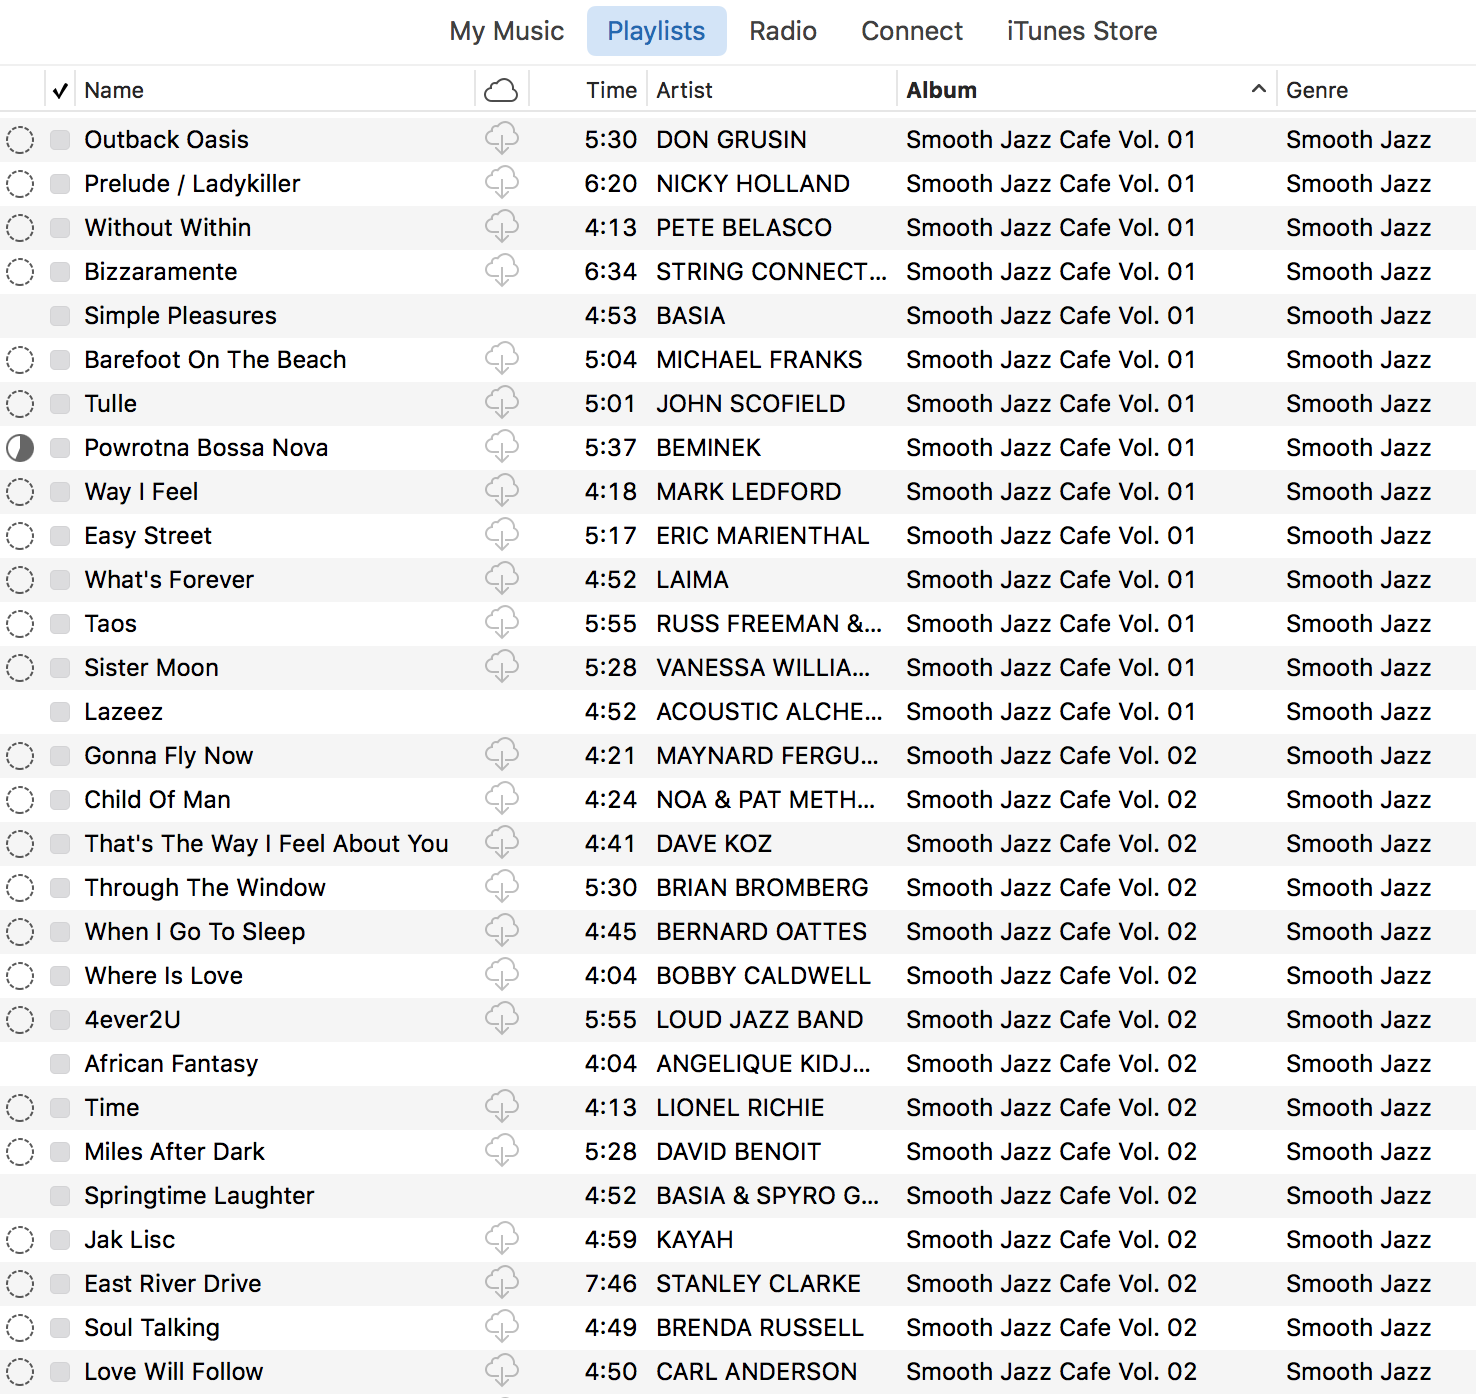 is itunes music stored on my pc and on the itunes website